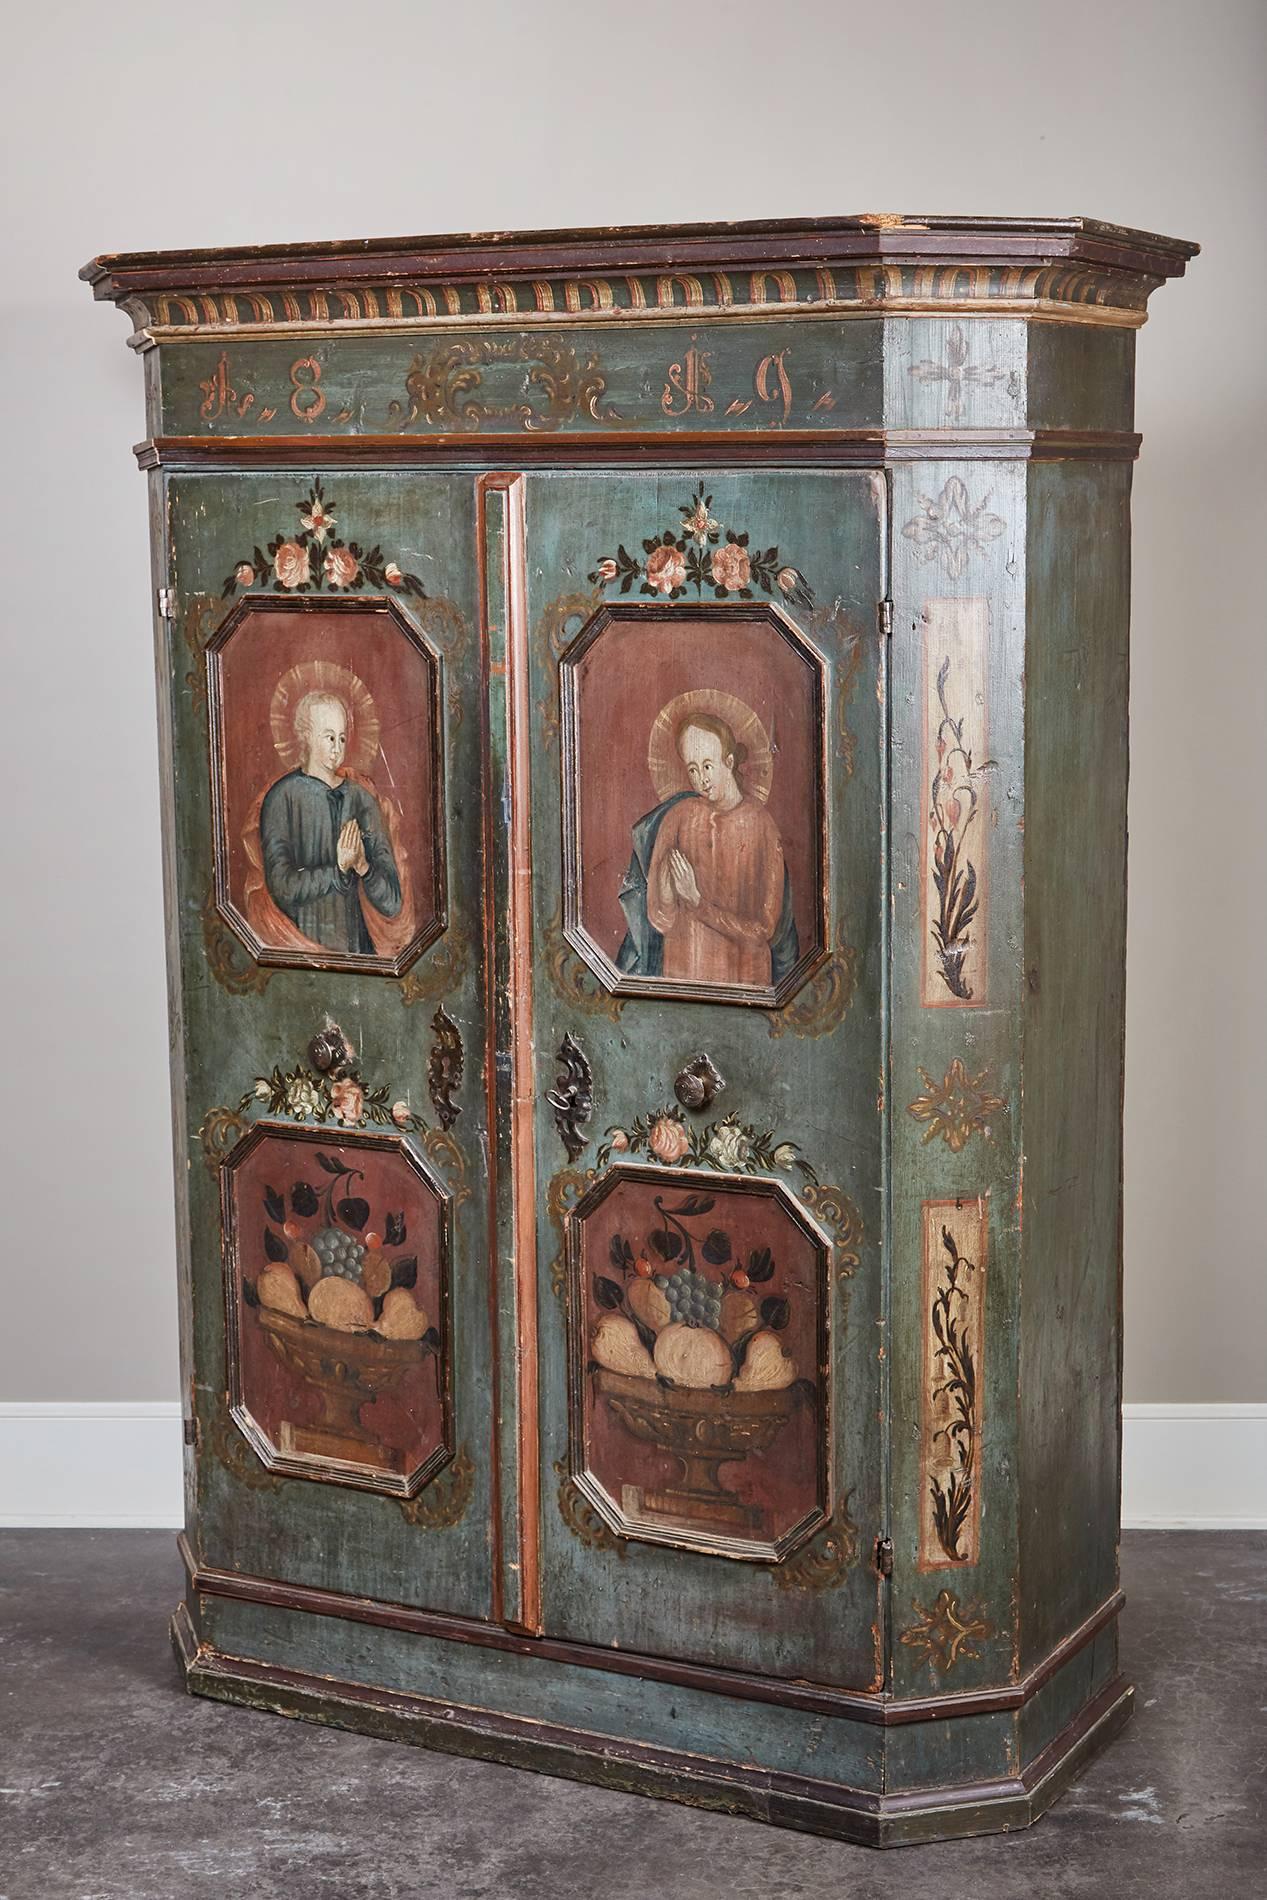 An early 19th century Southern German two-door cabinet with original paint and features design motifs such as stylized acanthus leaves, religious figures, and still life scenes. Dated in paint 1819.